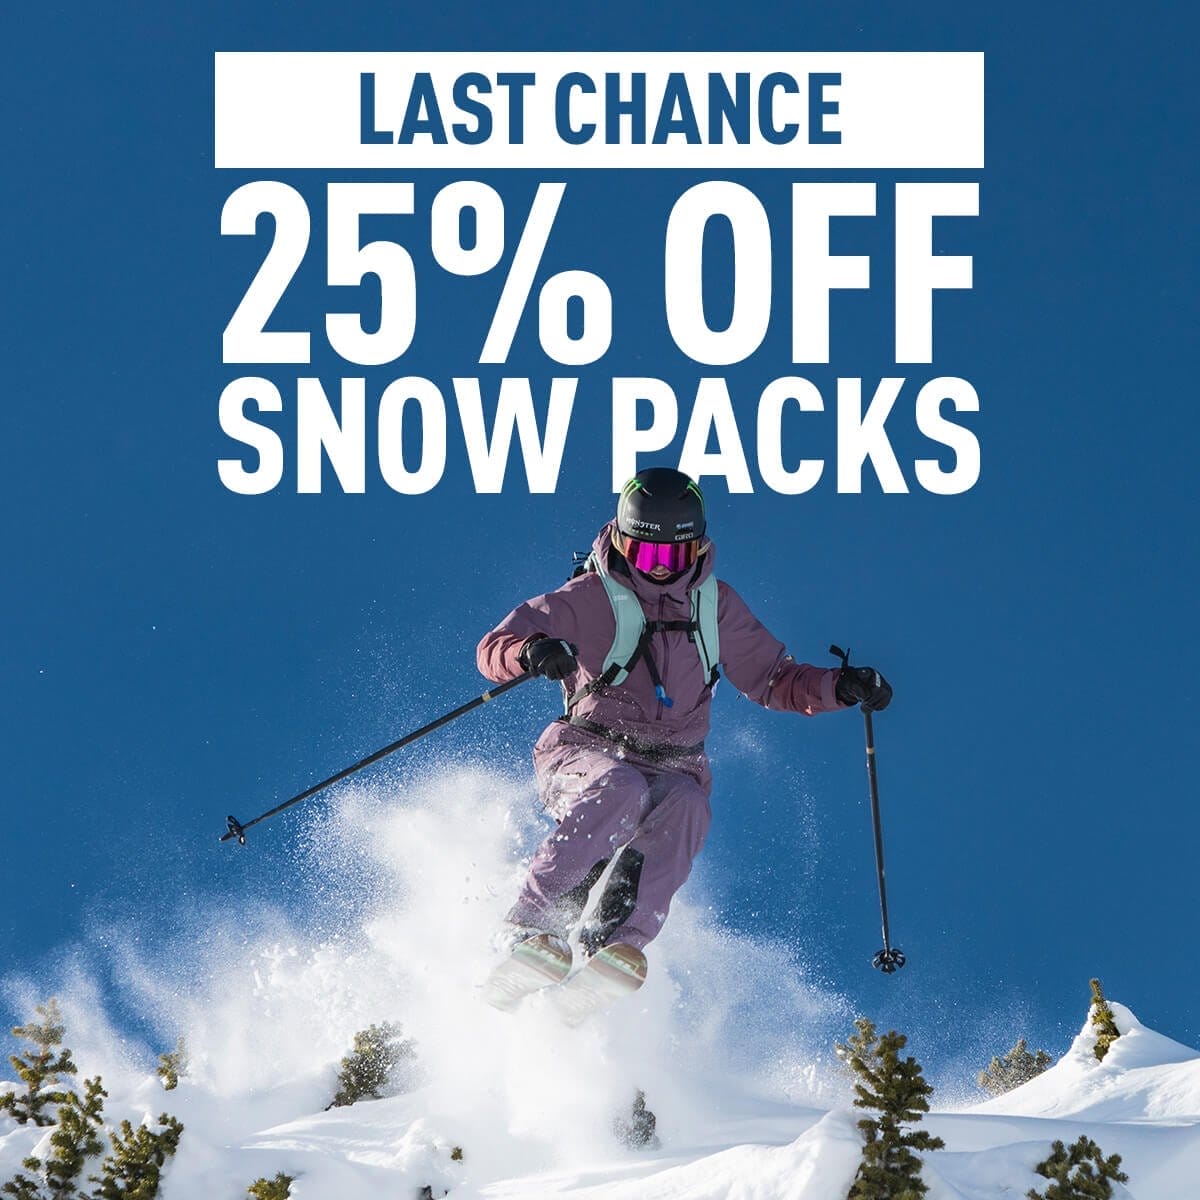 25% Off Snow Packs: Ends Soon